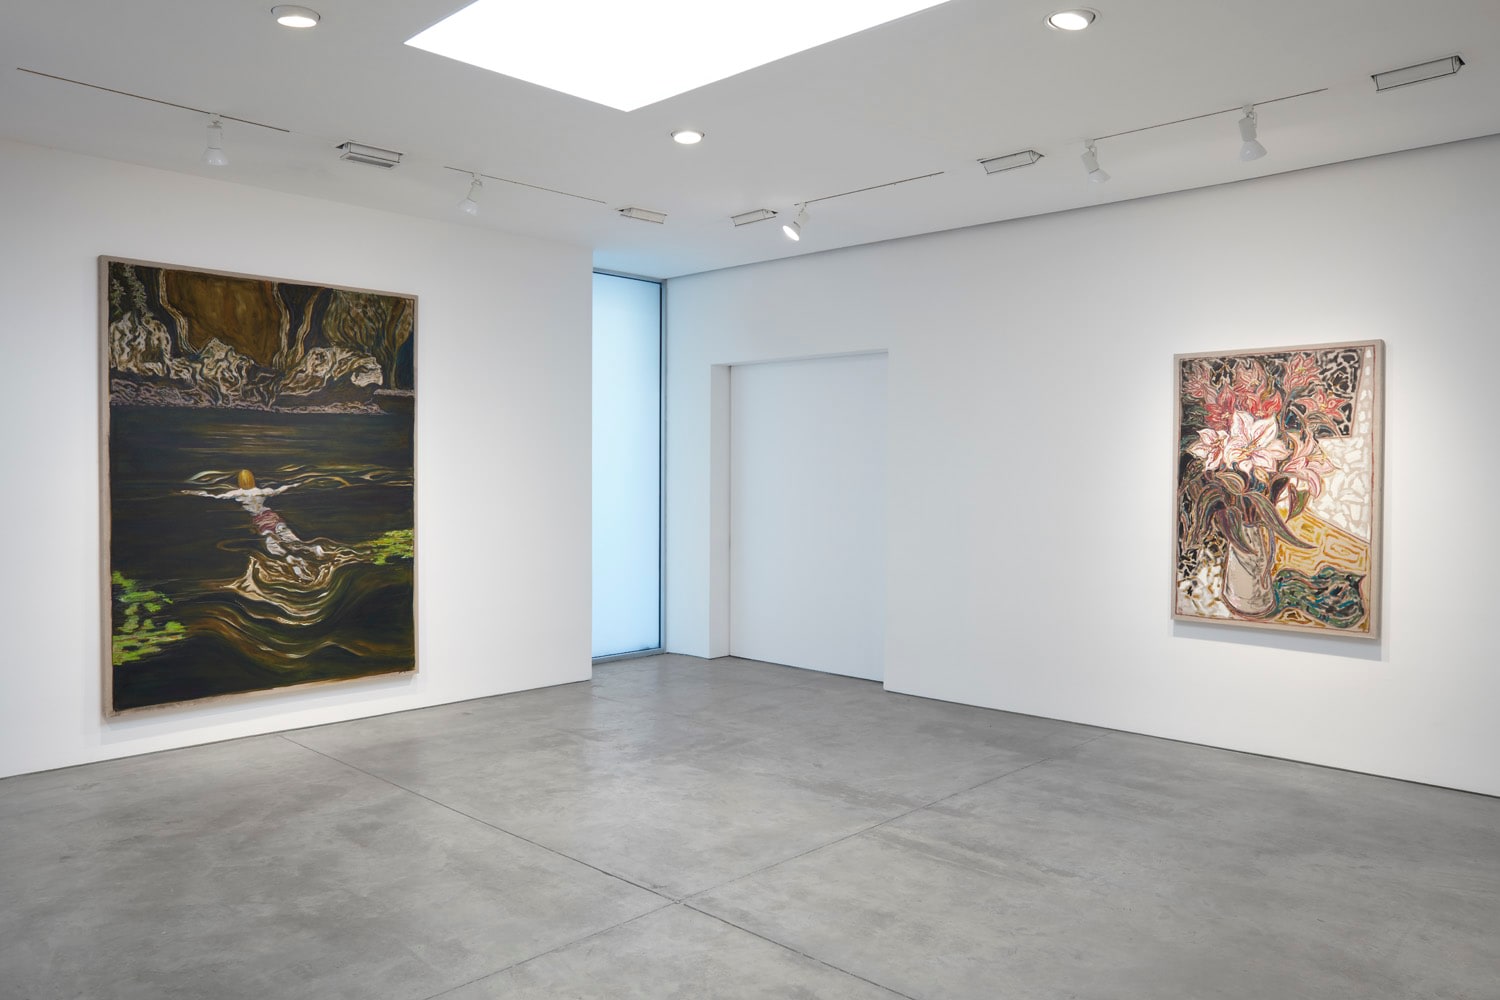 Installation view of Billy Childish exhibition at Lehmann Maupin gallery, New York, 2020, view 2